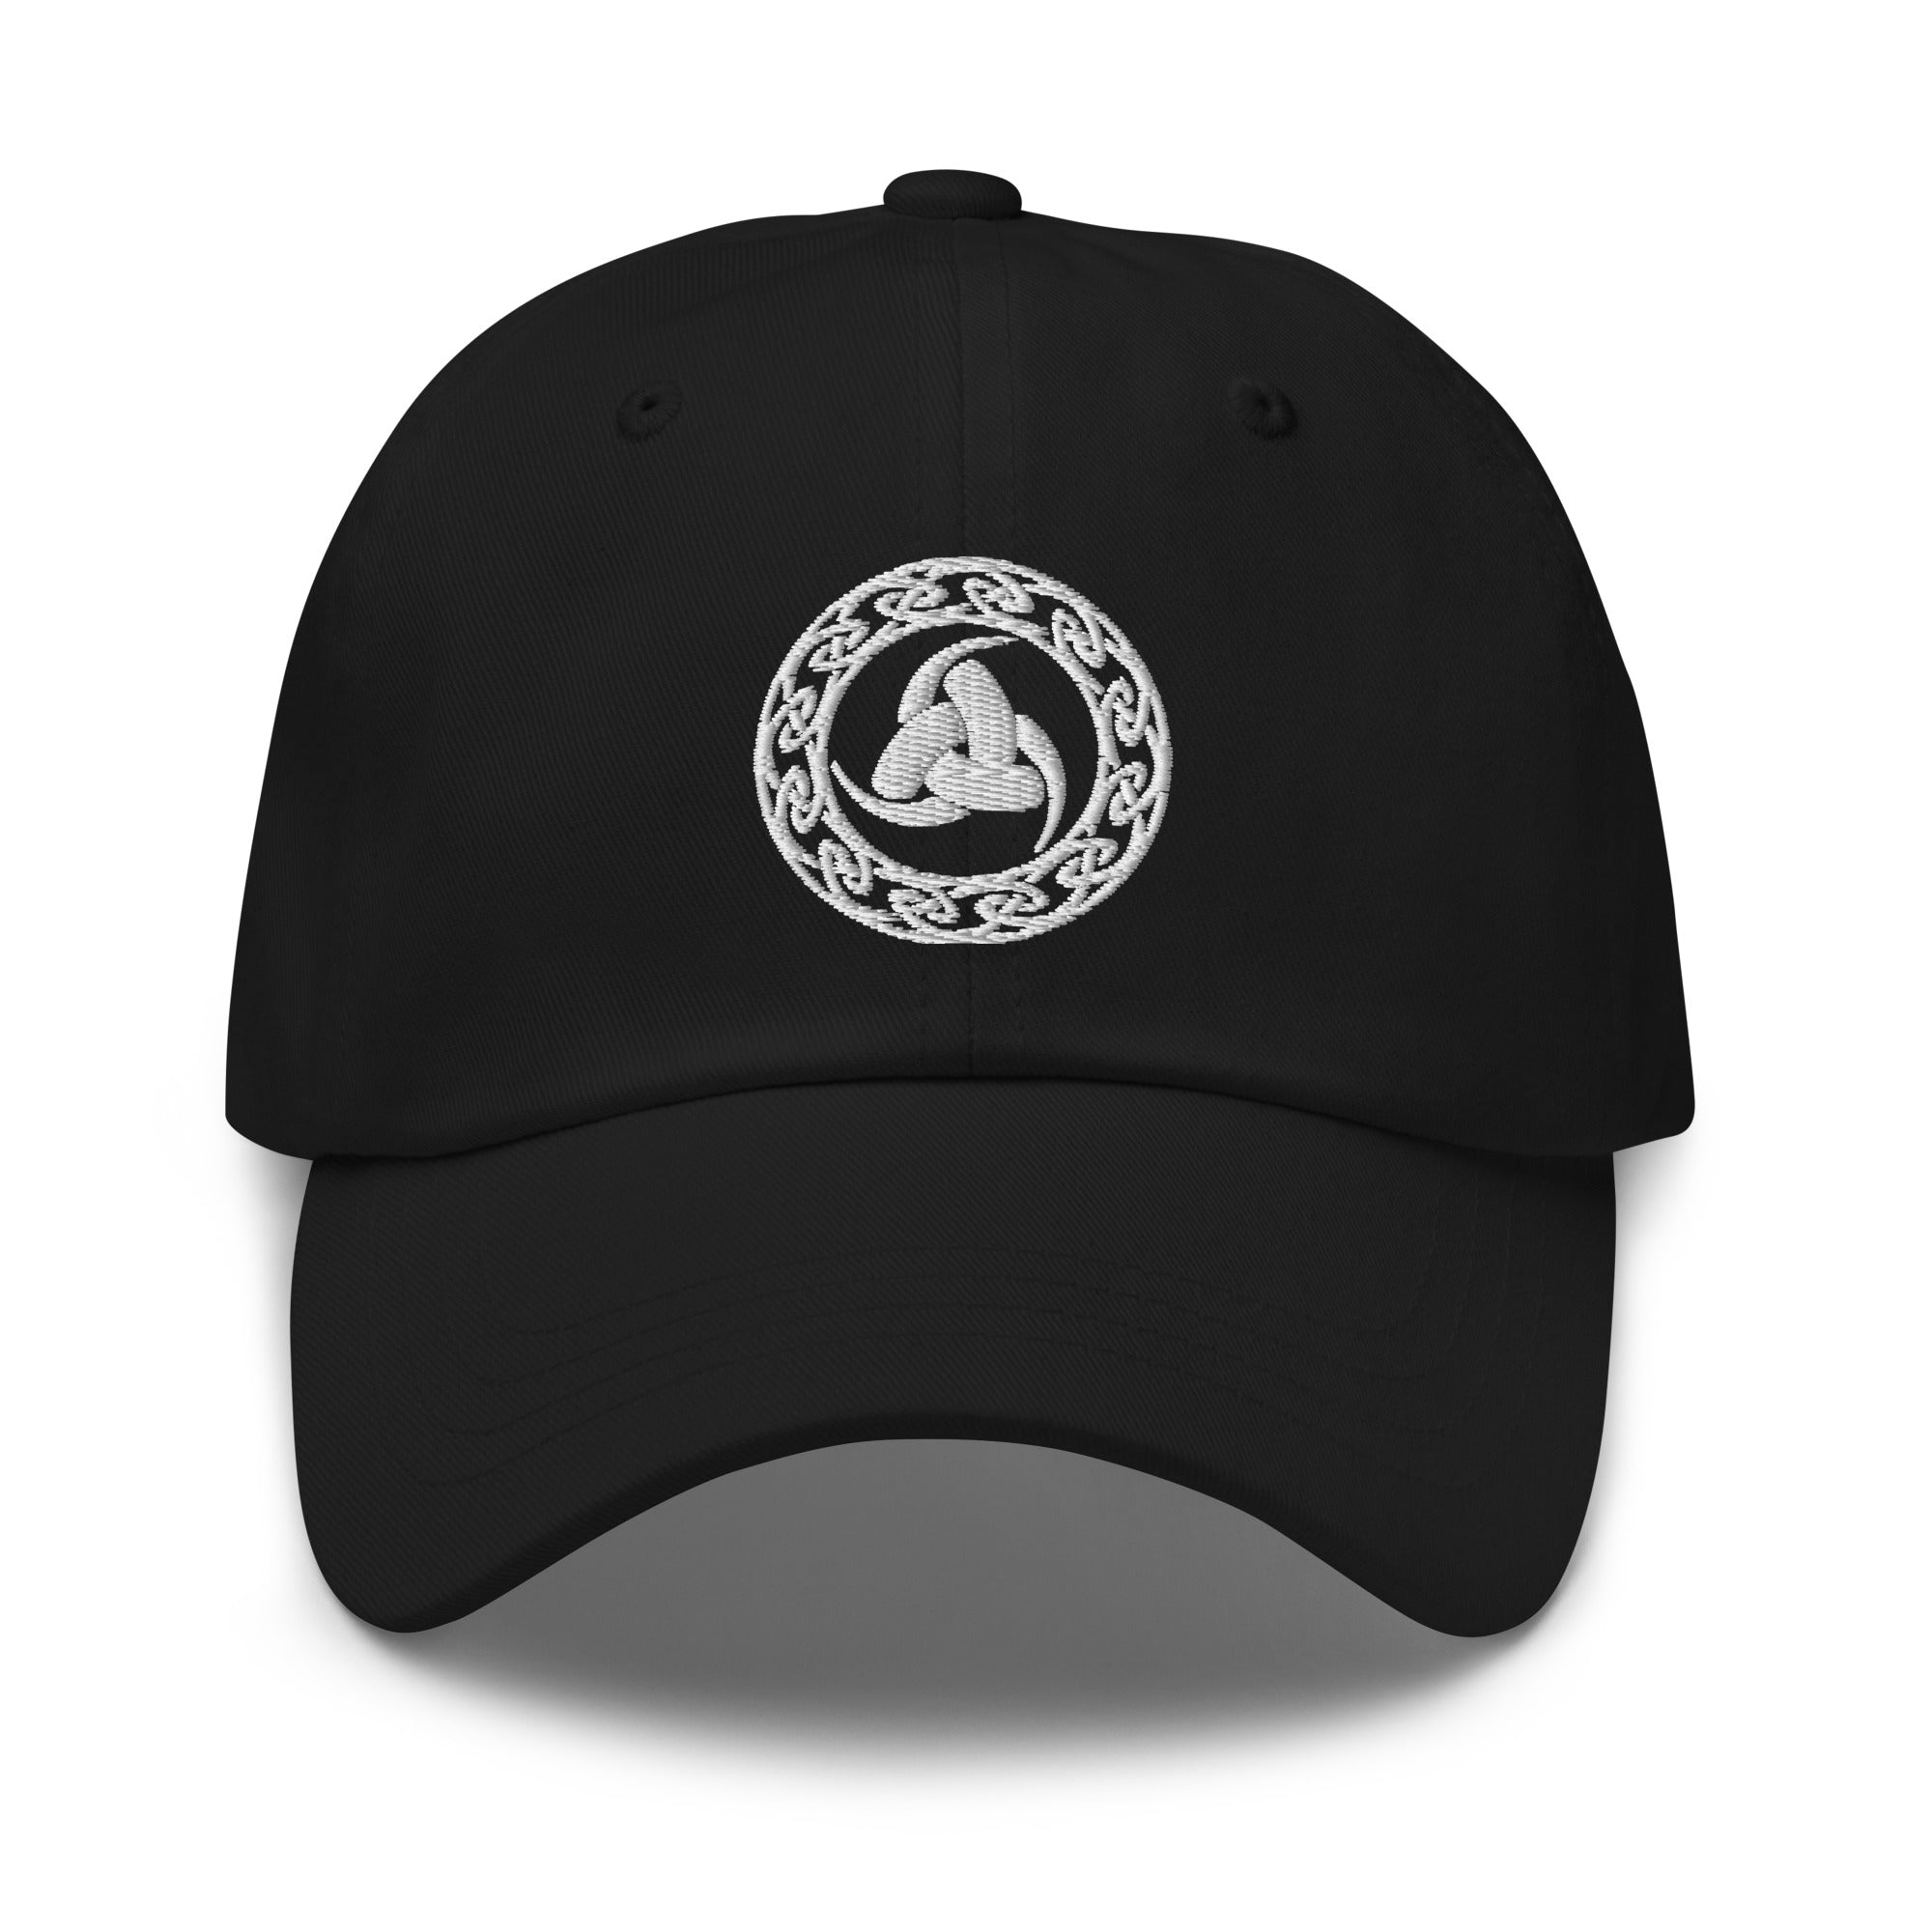 Odin's Knot - The Valknut Embroidered Baseball Cap Celtic Knots Dad hat - Edge of Life Designs